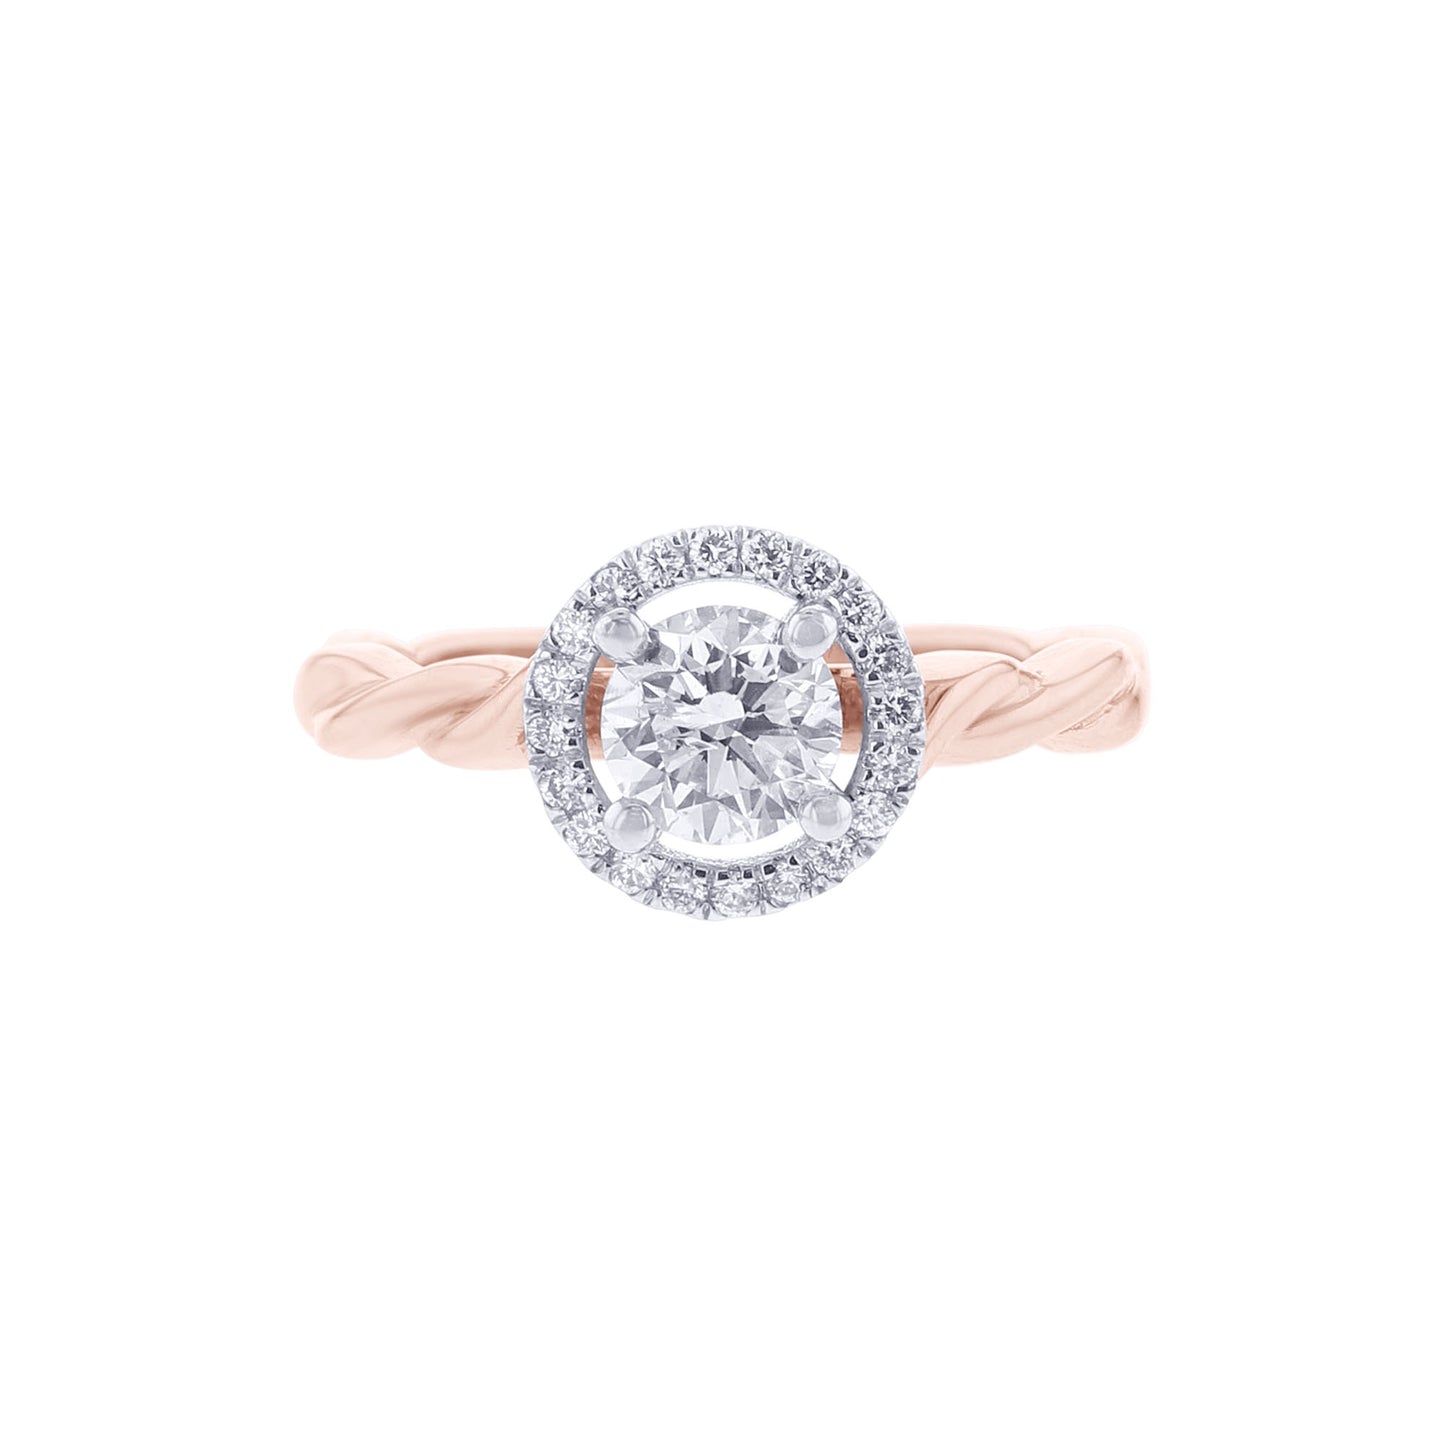 Marcella Twist Ready for Love Diamond Engagement Ring